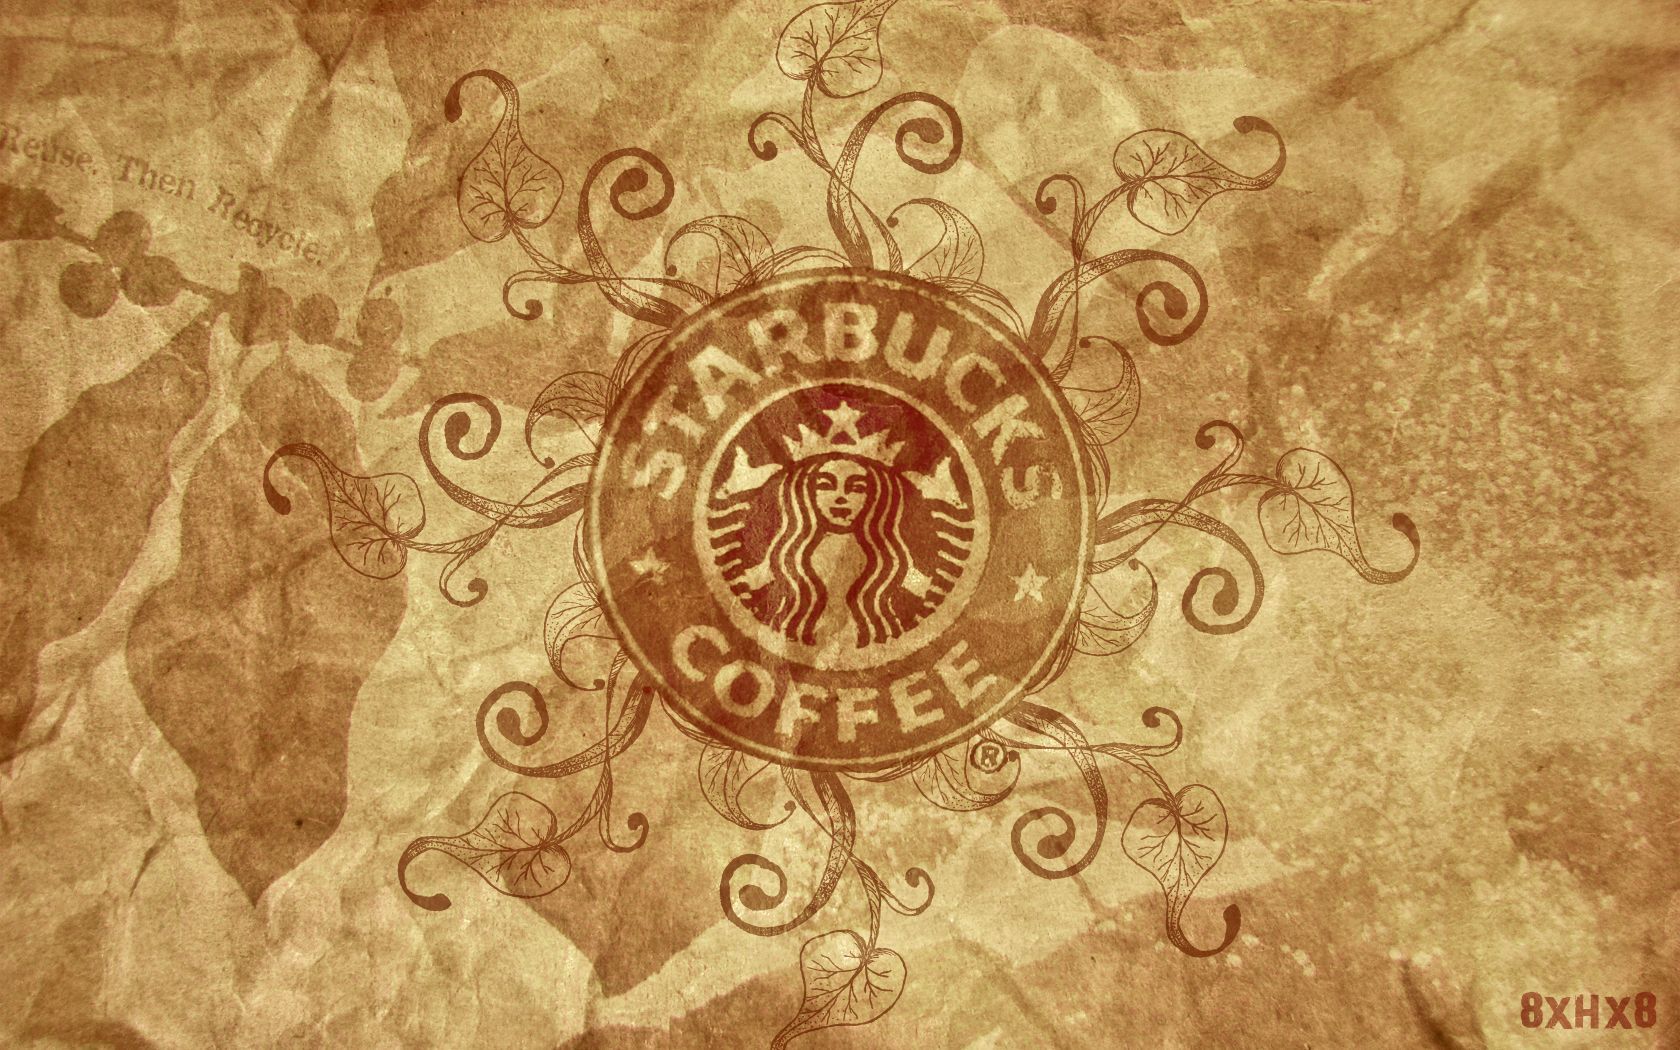 Love Starbucks Wallpapers Hd | High Definitions Wallpapers